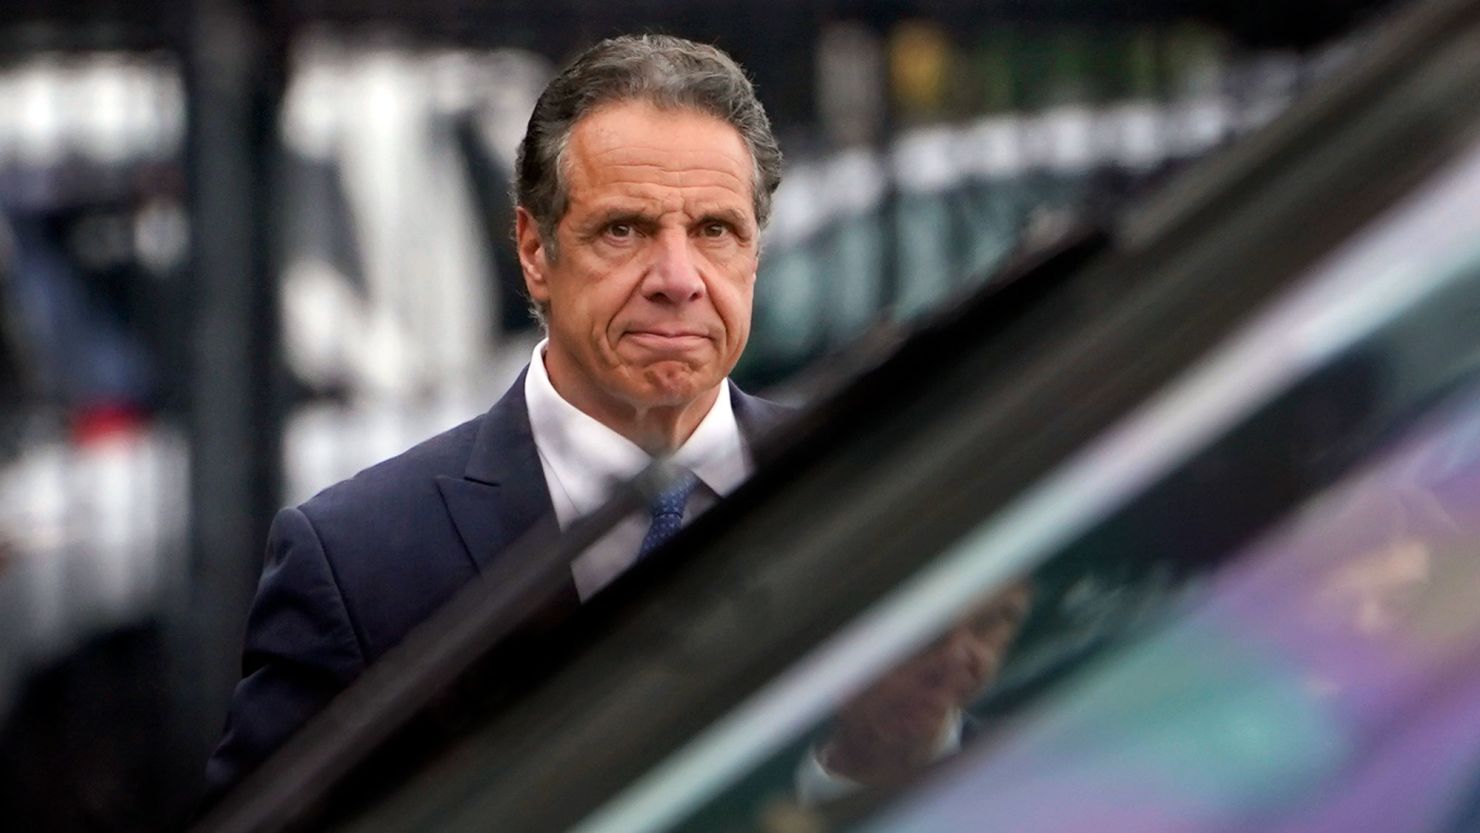 New York Gov. Andrew Cuomo prepares to board a helicopter after announcing his resignation on August 10, 2021, in New York.